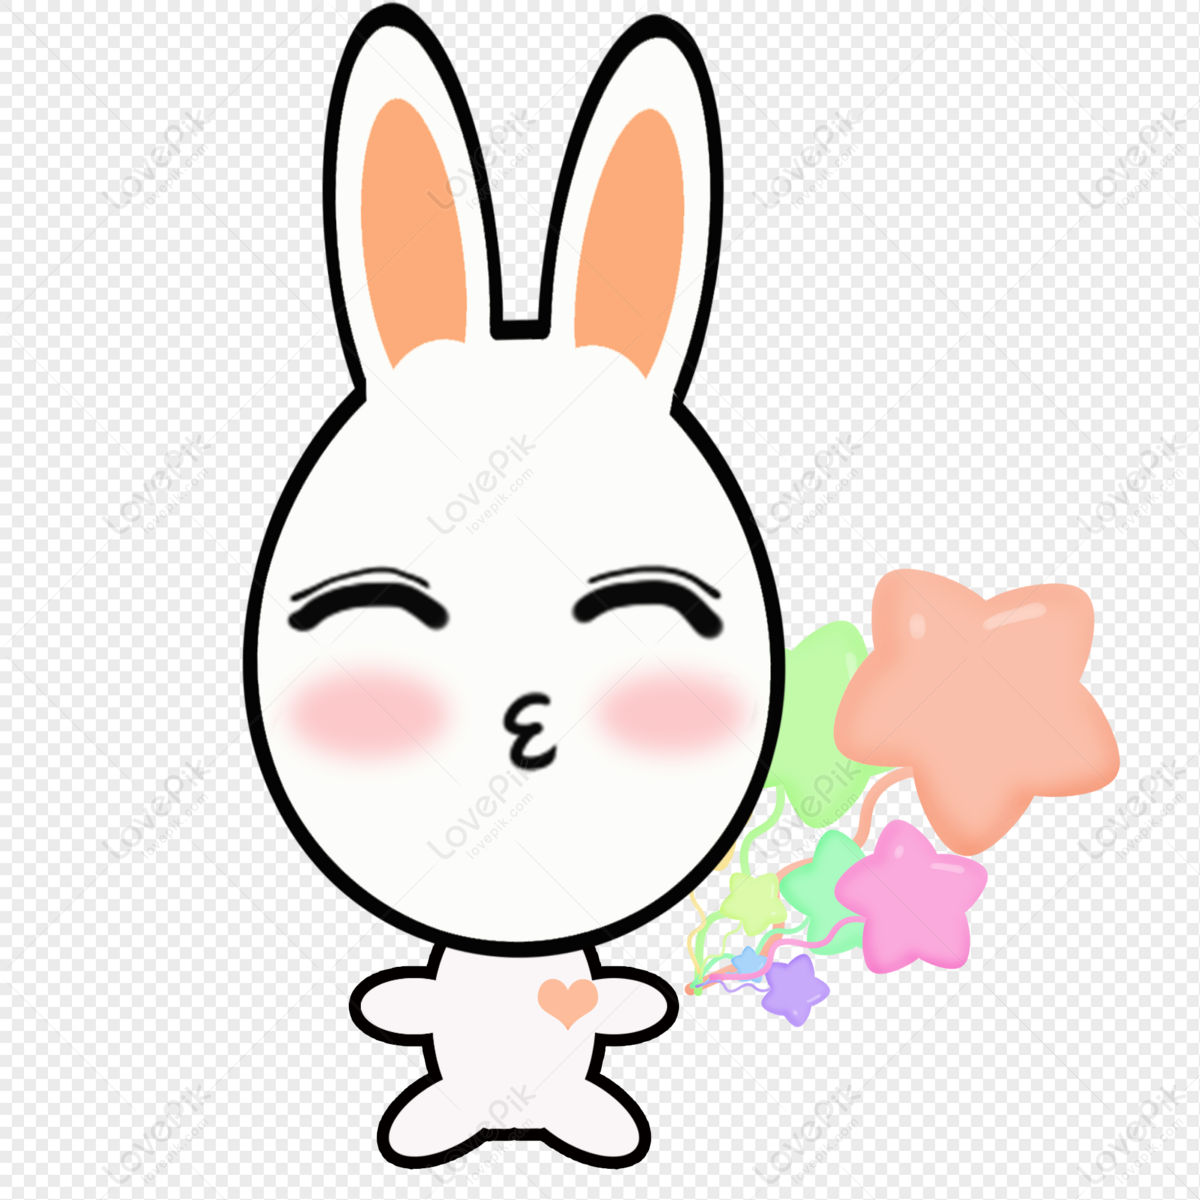 Rabbit Expression Pack Free PNG And Clipart Image For Free Download ...